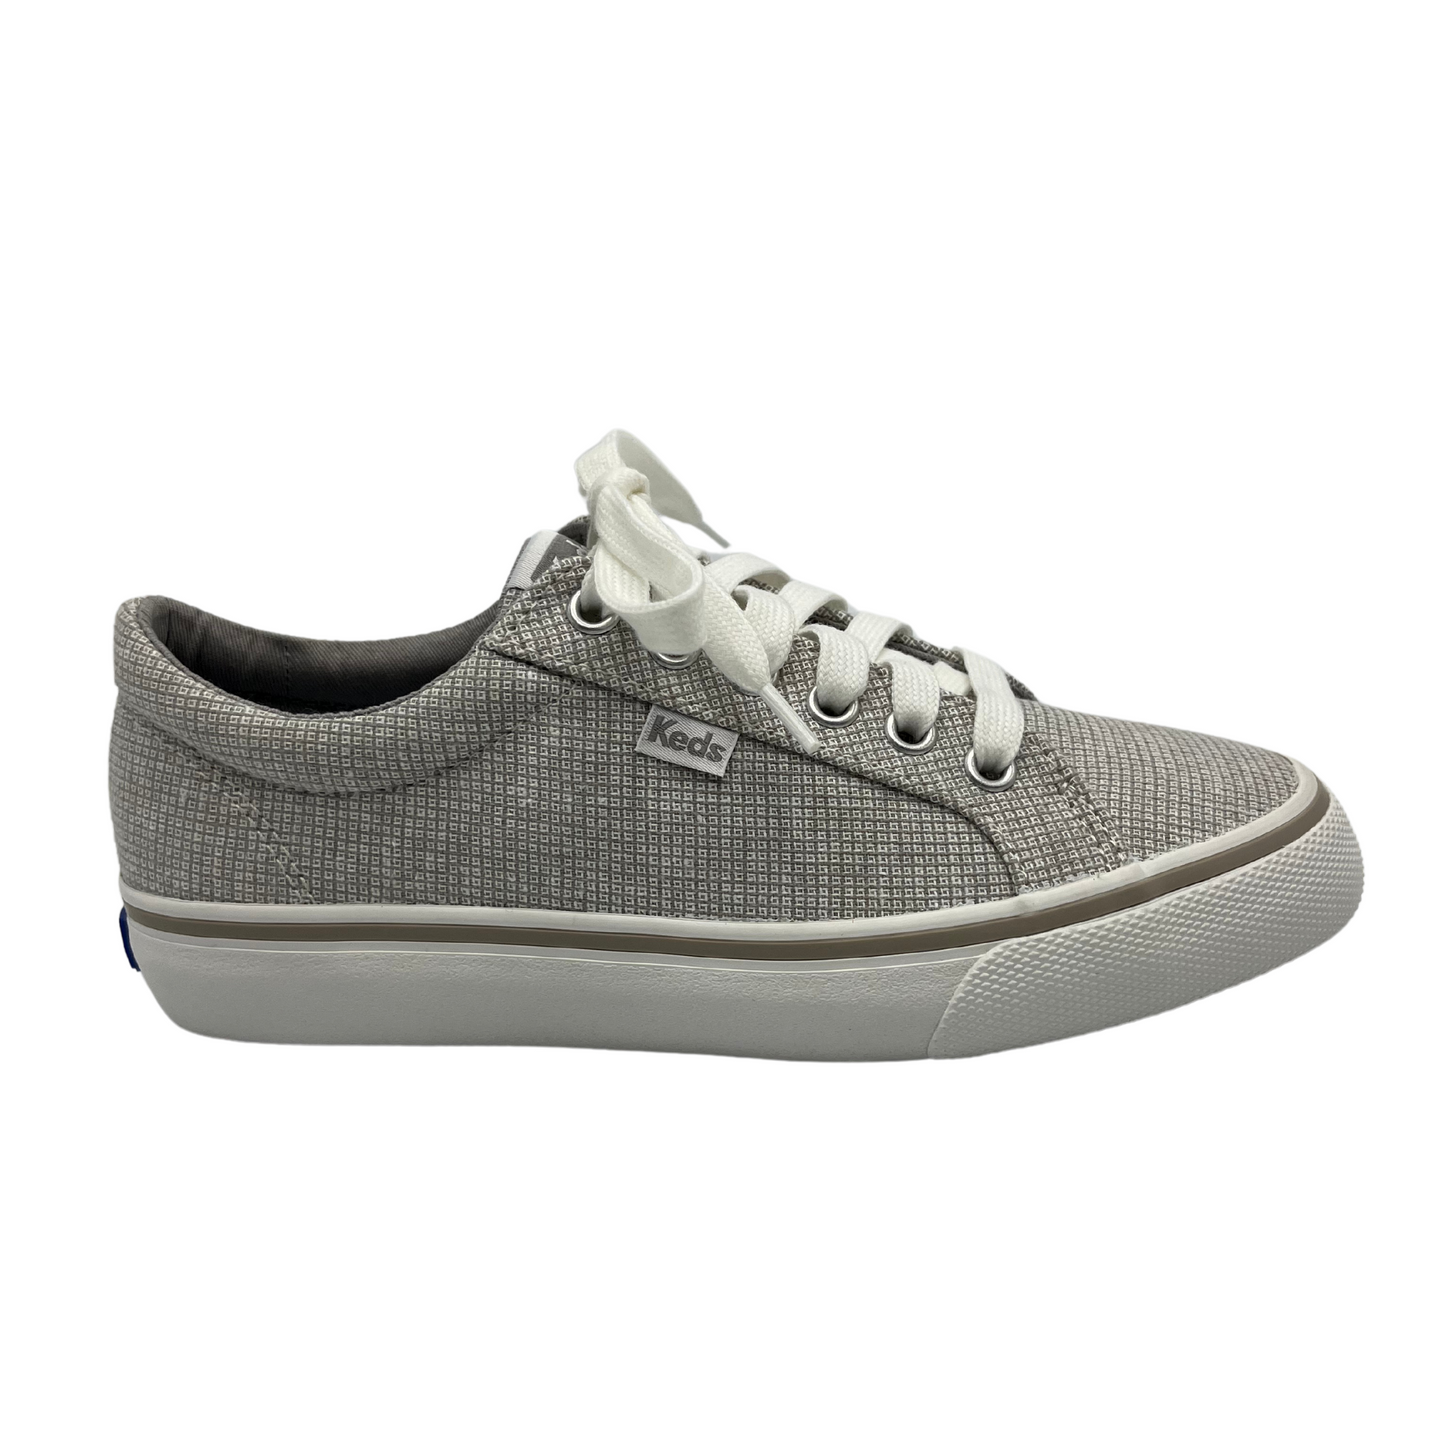 Right facing view of grey check canvas sneaker with white rubber outsole, white laces and padded collar